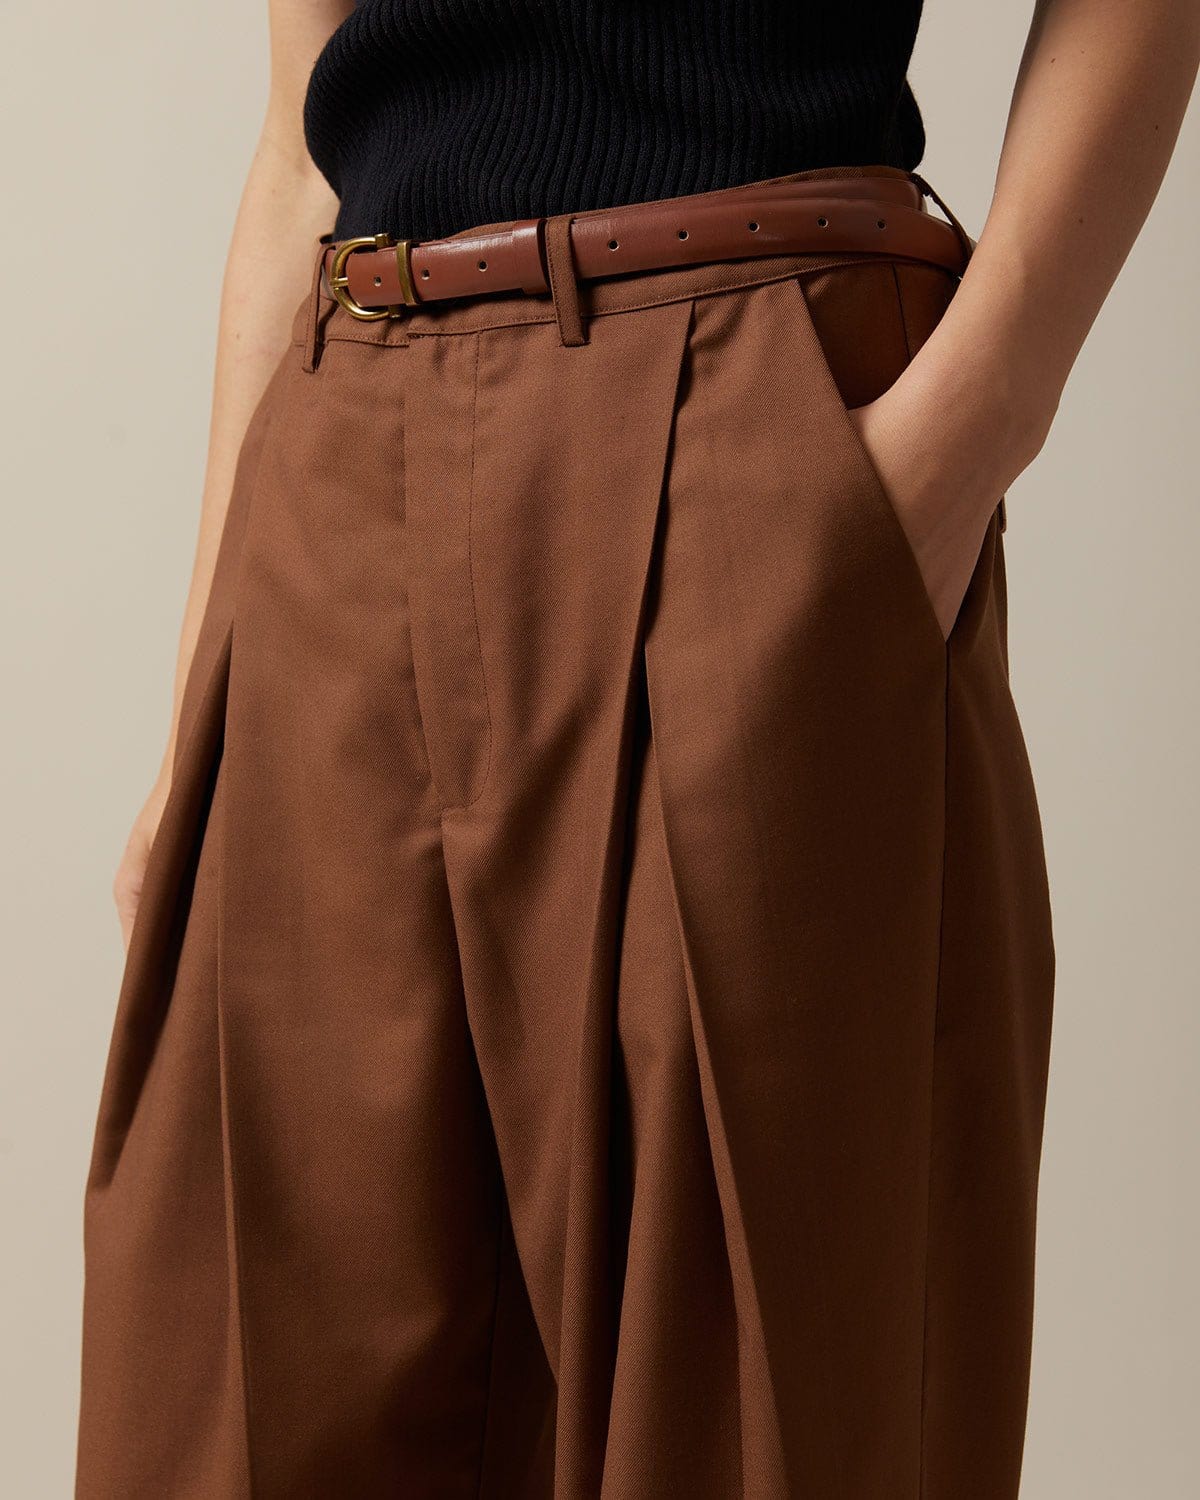 The Brown High Waisted Pleated Straight Pants - Women's High Waisted  Pleated Straight Leg Pants - Brown - Bottoms